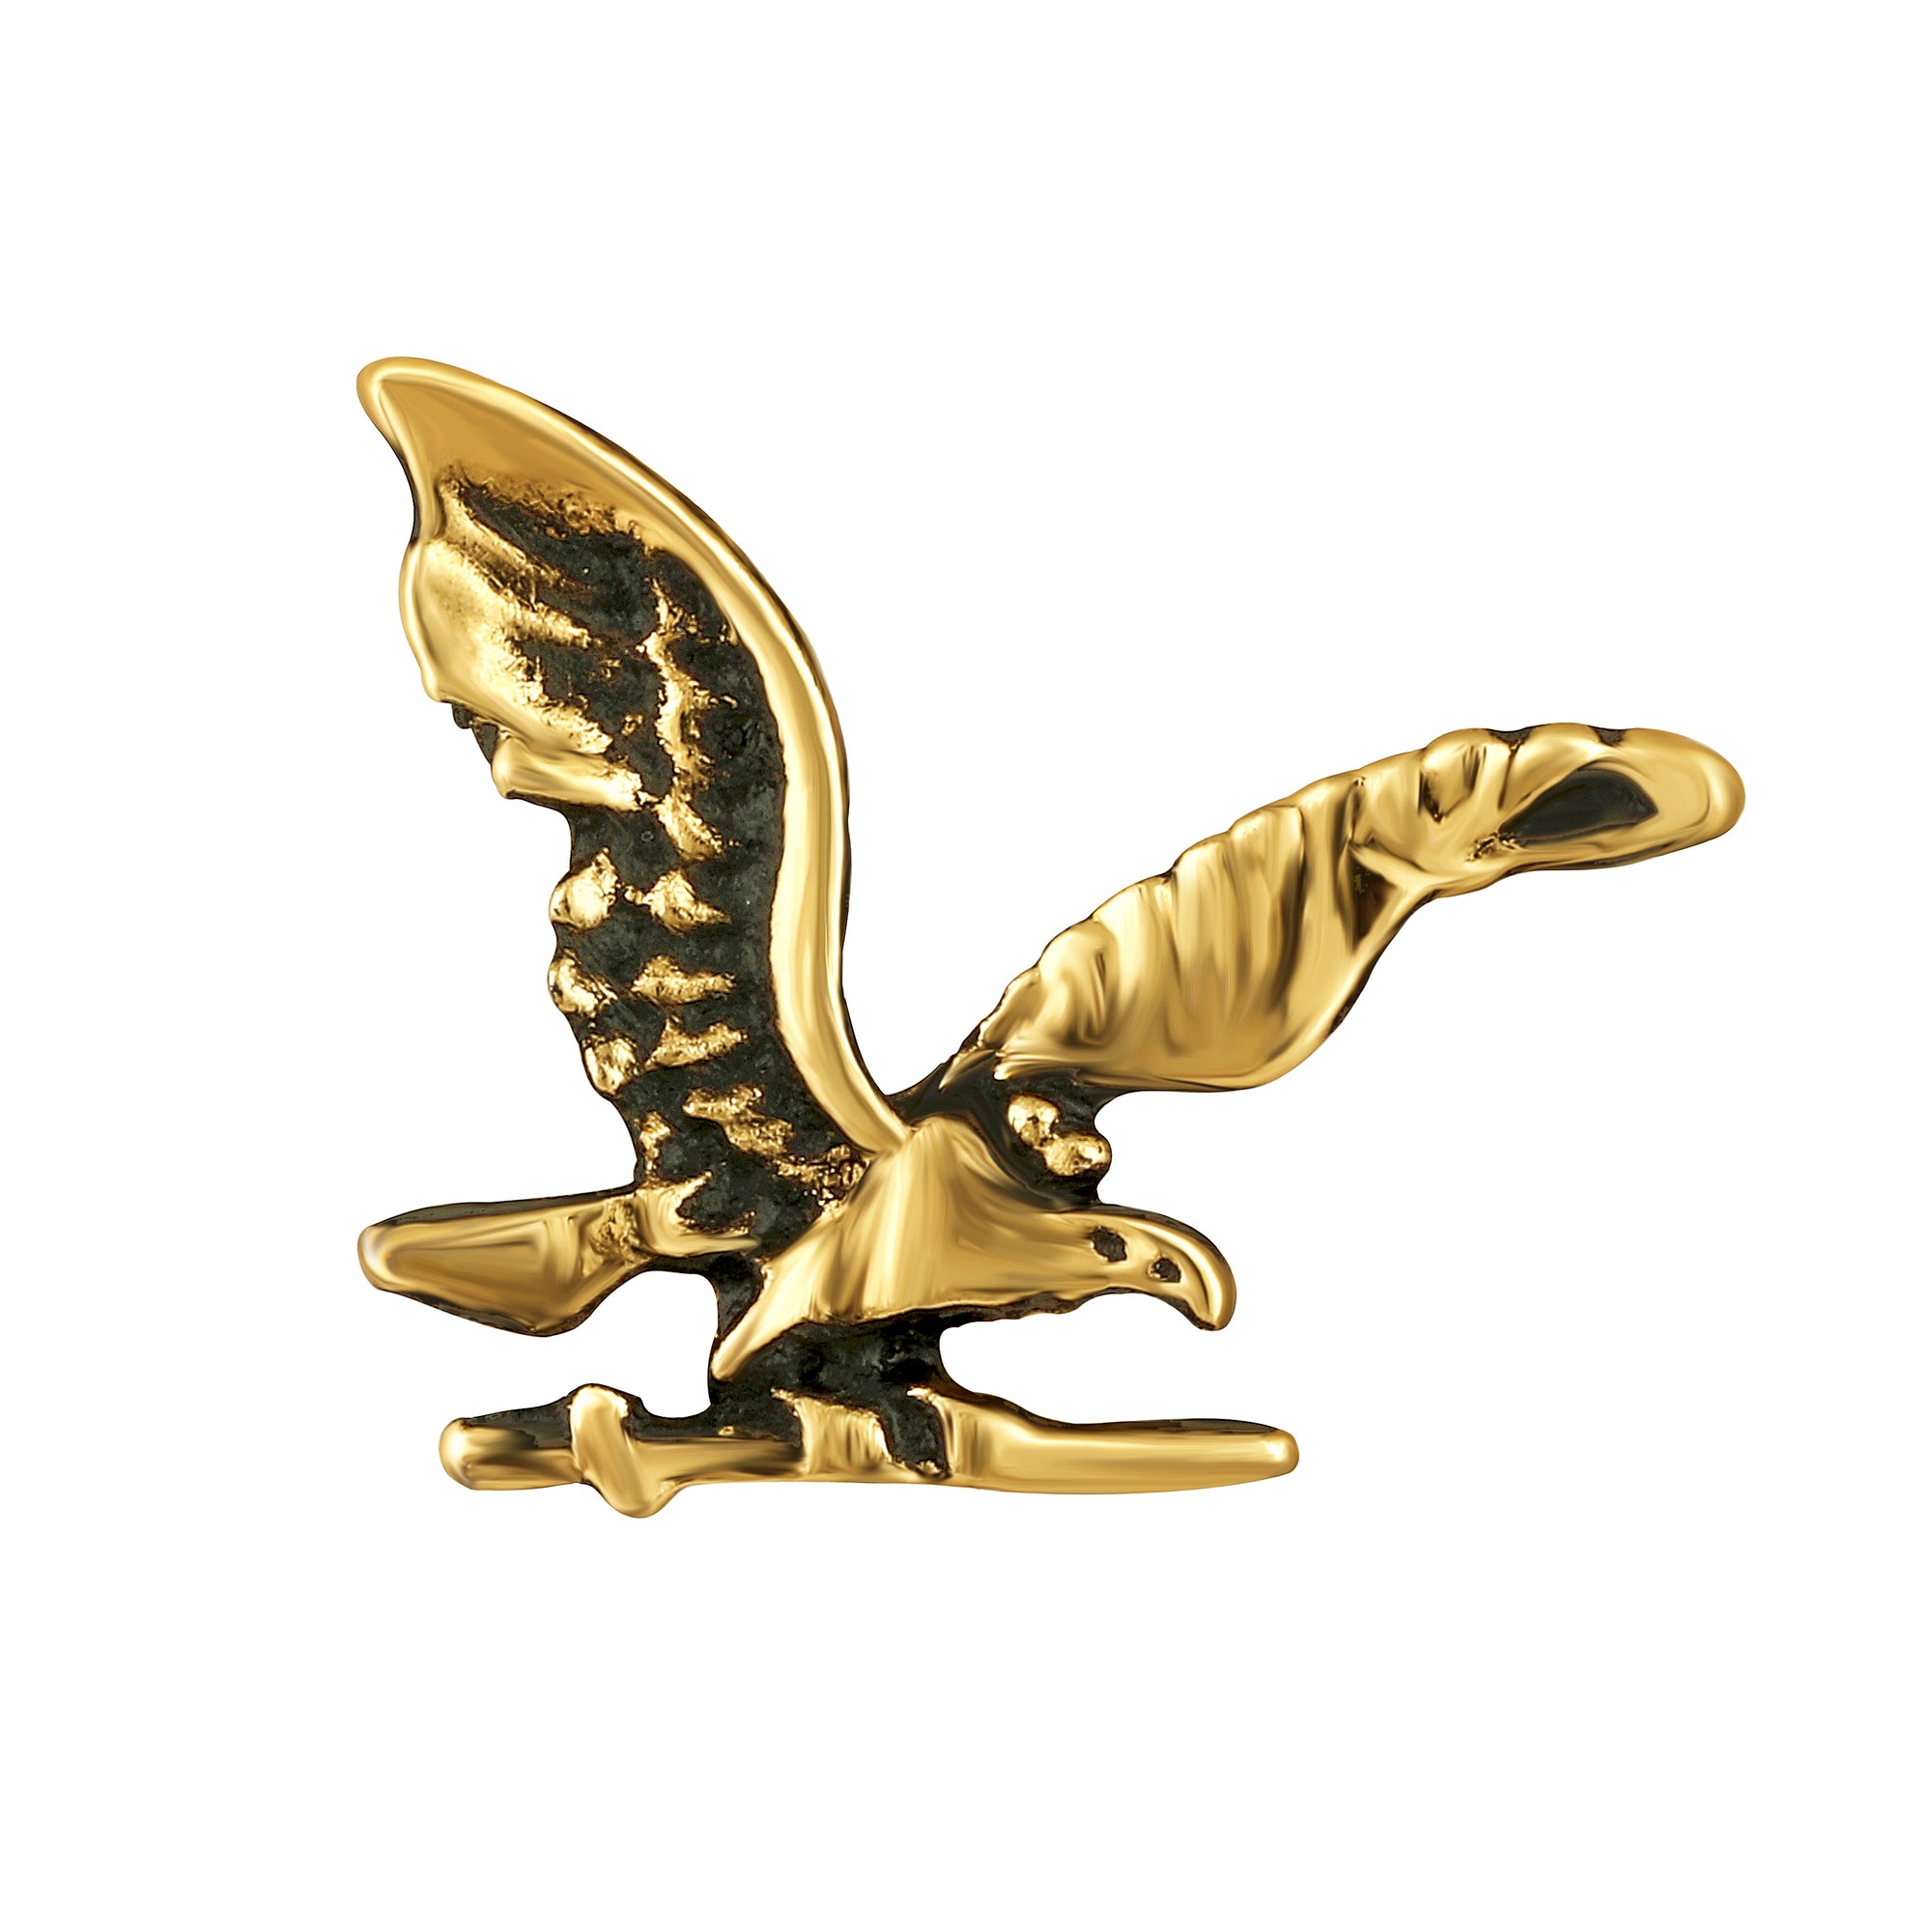 Antique Eagle-Shaped Brooch / Lapel Pin